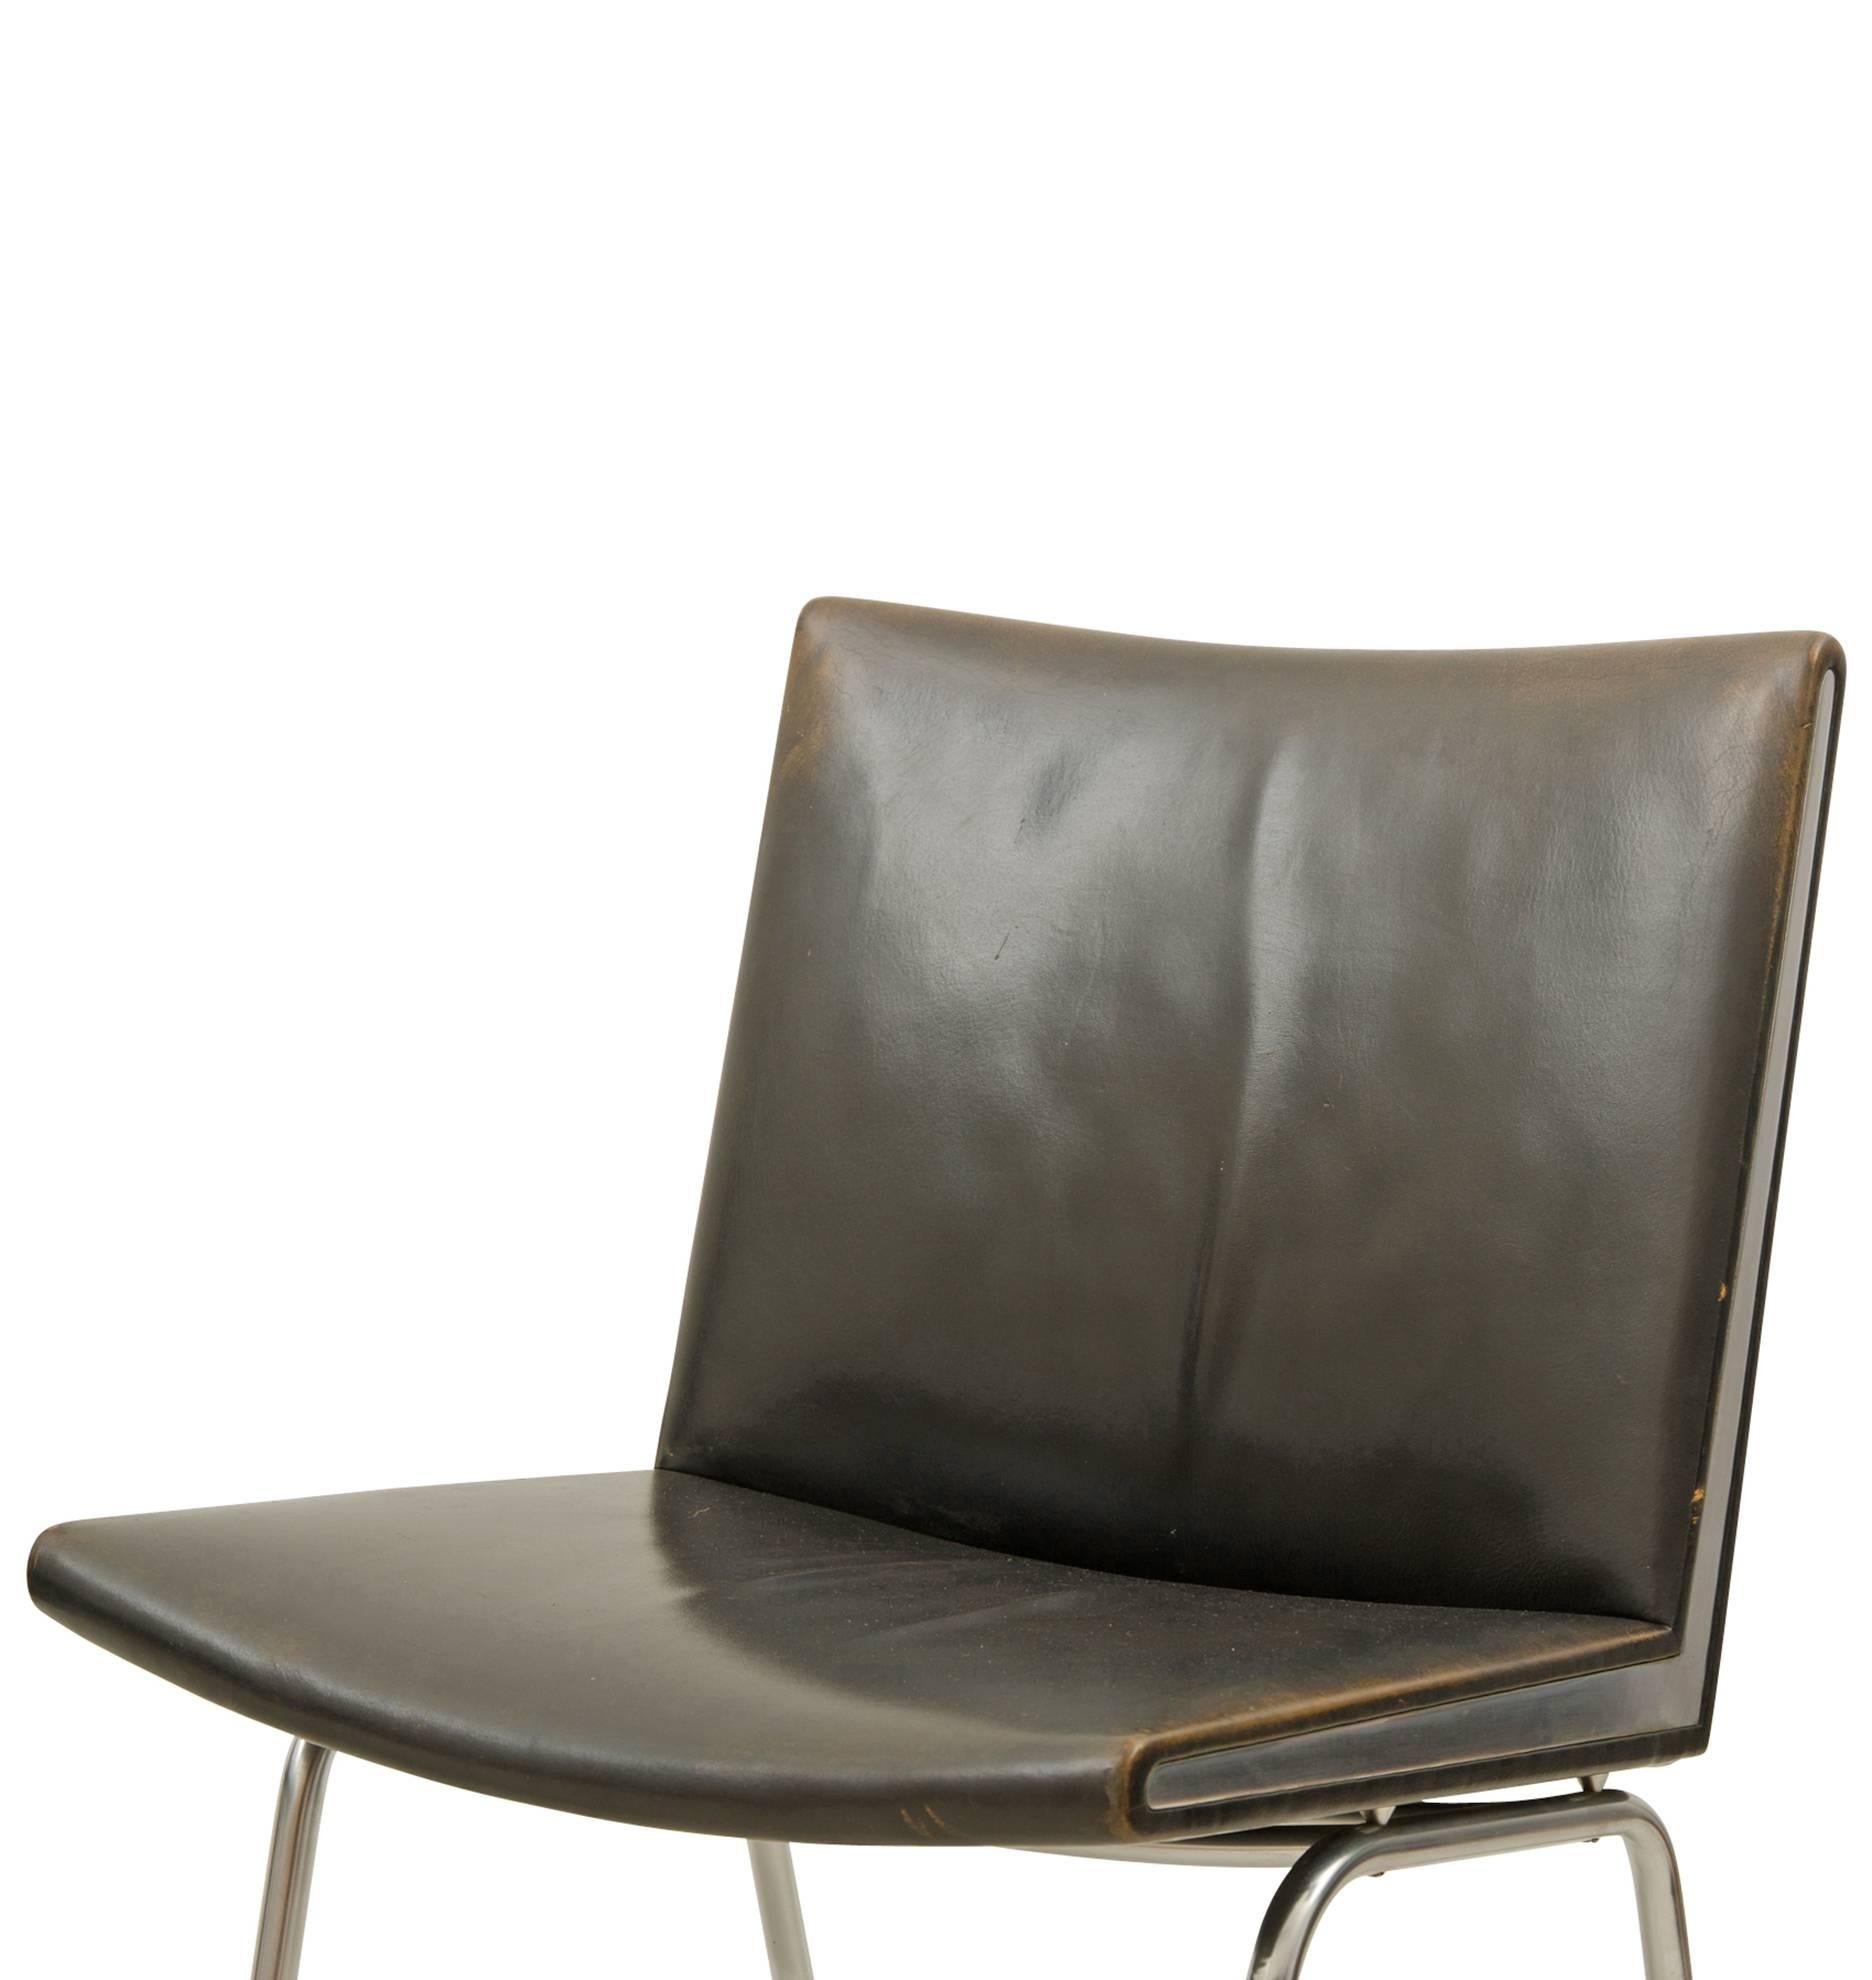 Designed by Hans J. Wegner, these leather and tubular chrome lounge chairs are quintessentially Danish in style and in use, as they were commissioned for the Kastrup Airport in Copenhagen. The chairs were manufactured by A.P. Stolen from